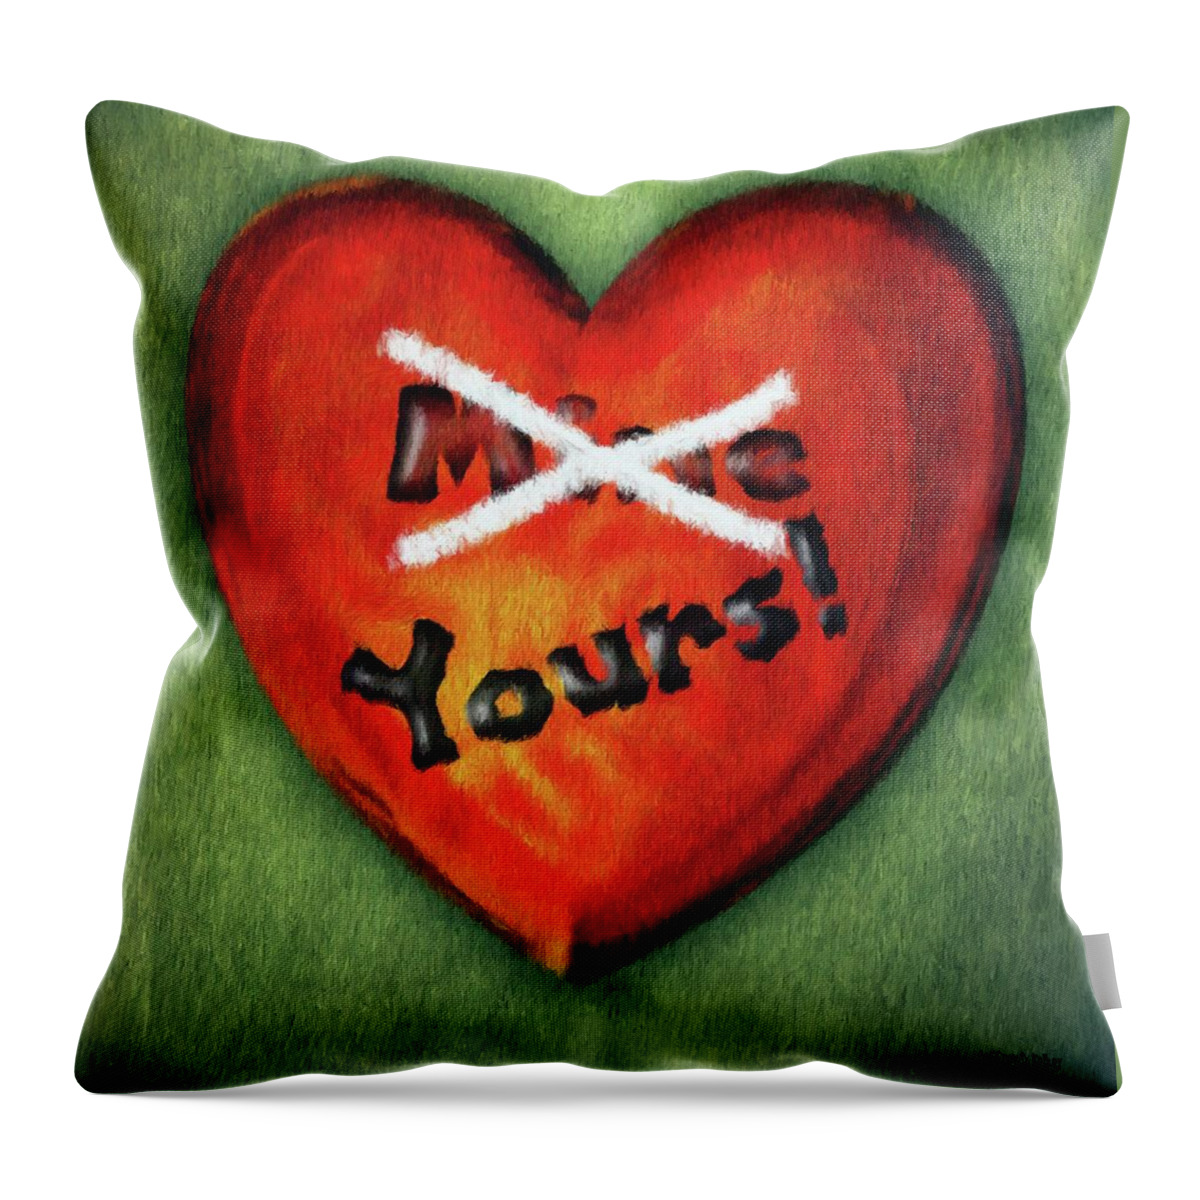 Green Throw Pillow featuring the painting I Gave You My Heart by Jeffrey Kolker